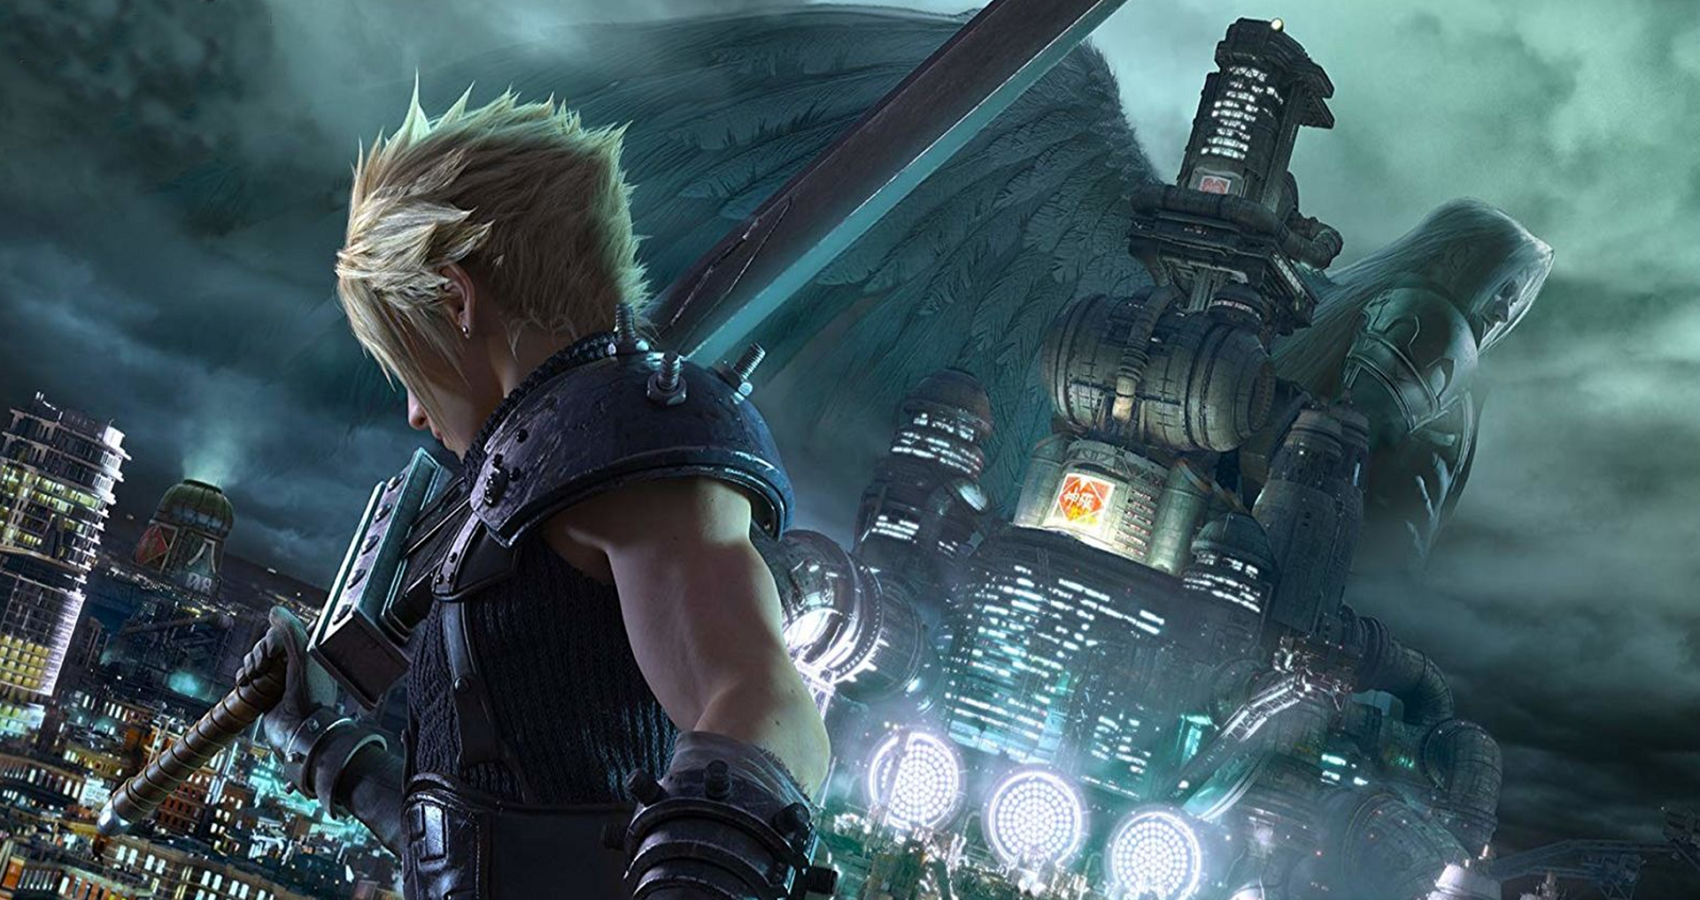 15 Facts You Never Knew About Midgar From Final Fantasy 7